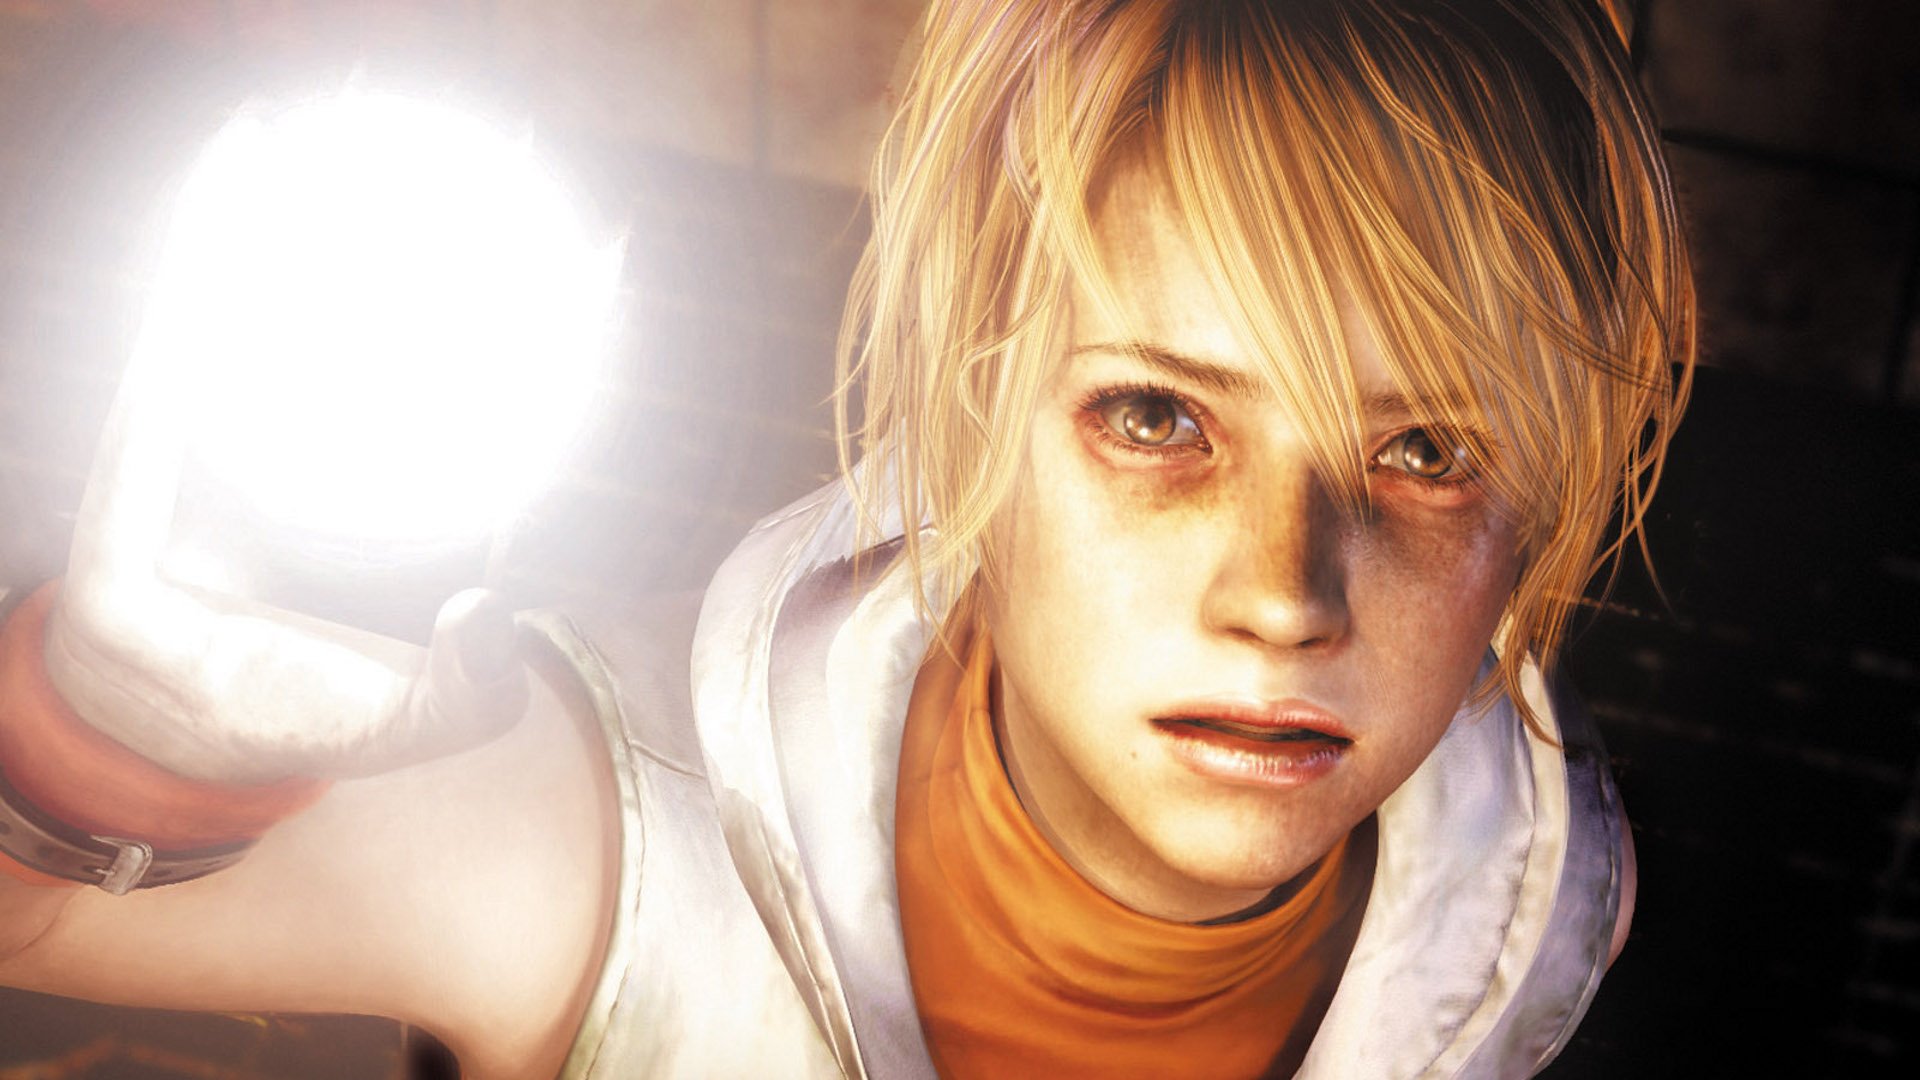 3. "Silent Hill" speedrun community featuring blue-haired girl - wide 10